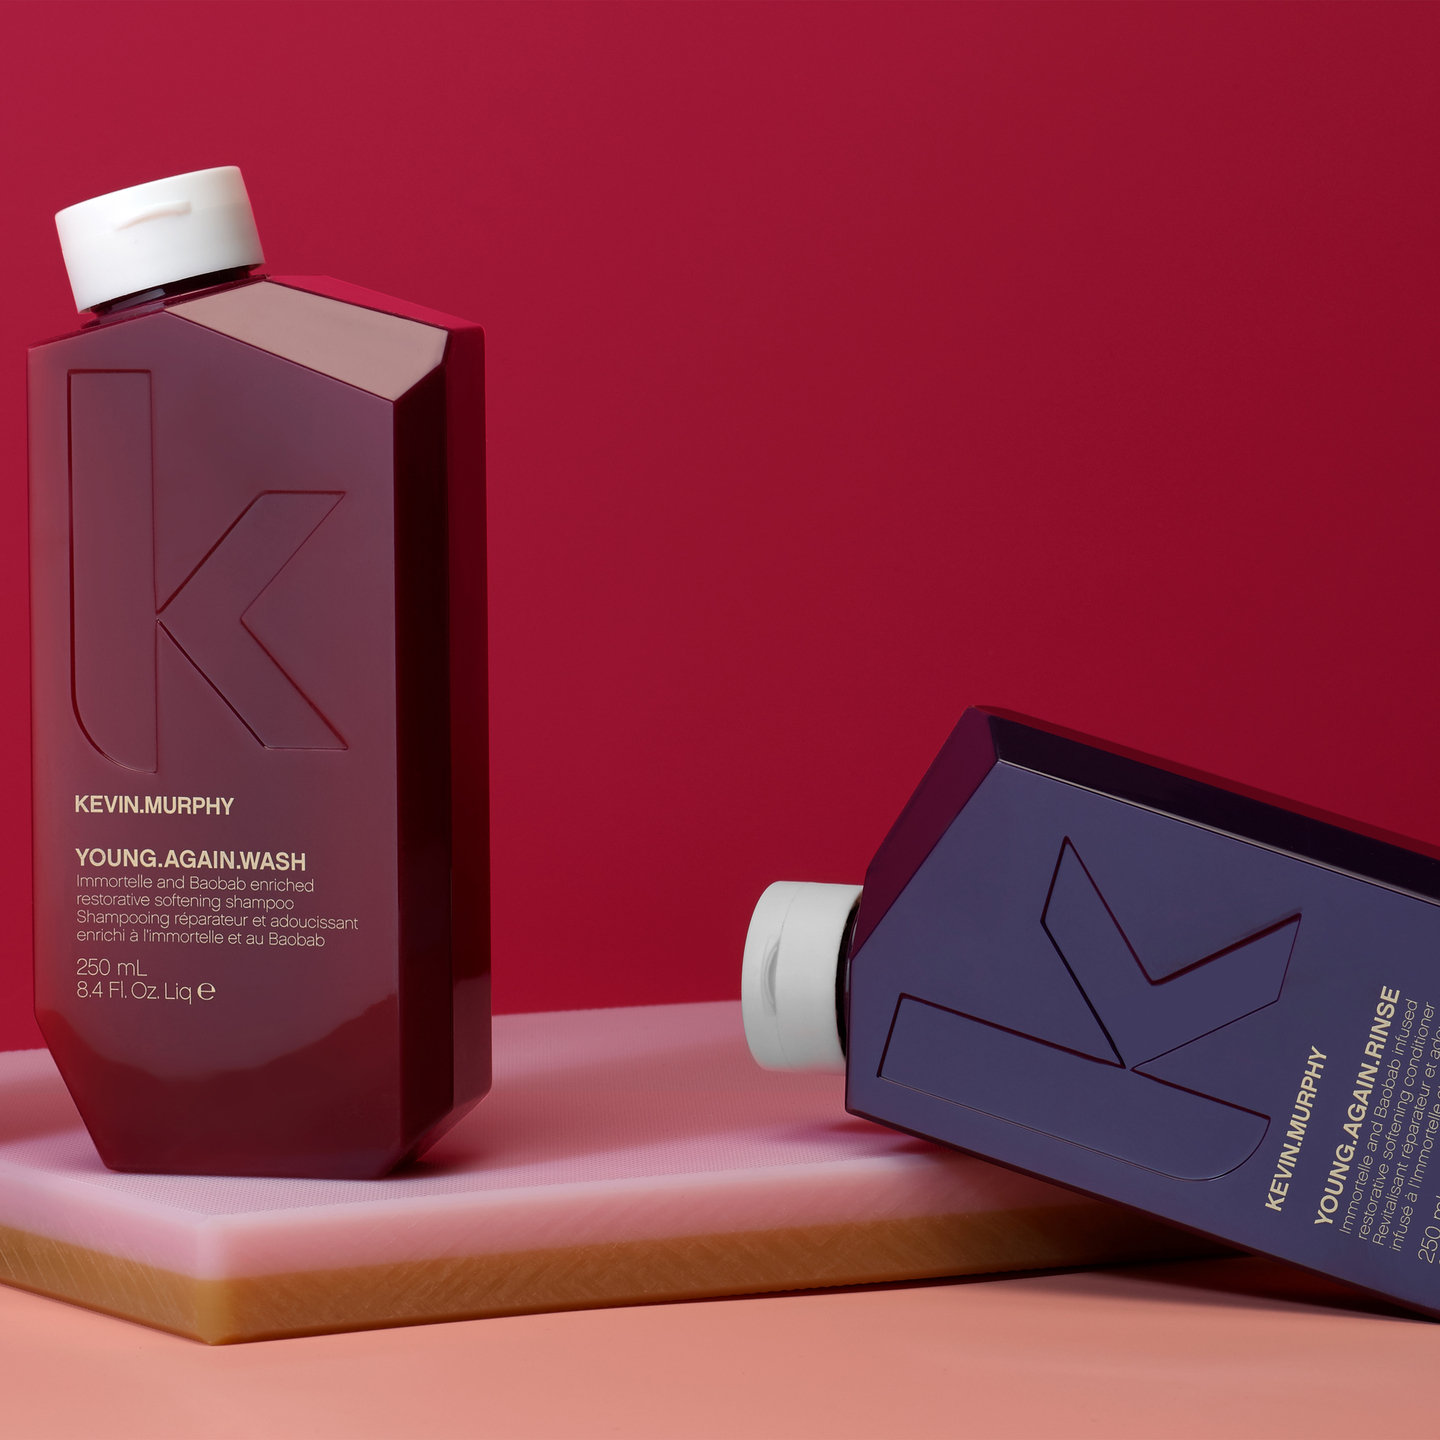 KEVIN.MURPHY YOUNG.AGAIN.WASH & RINSE on a peach and red background.